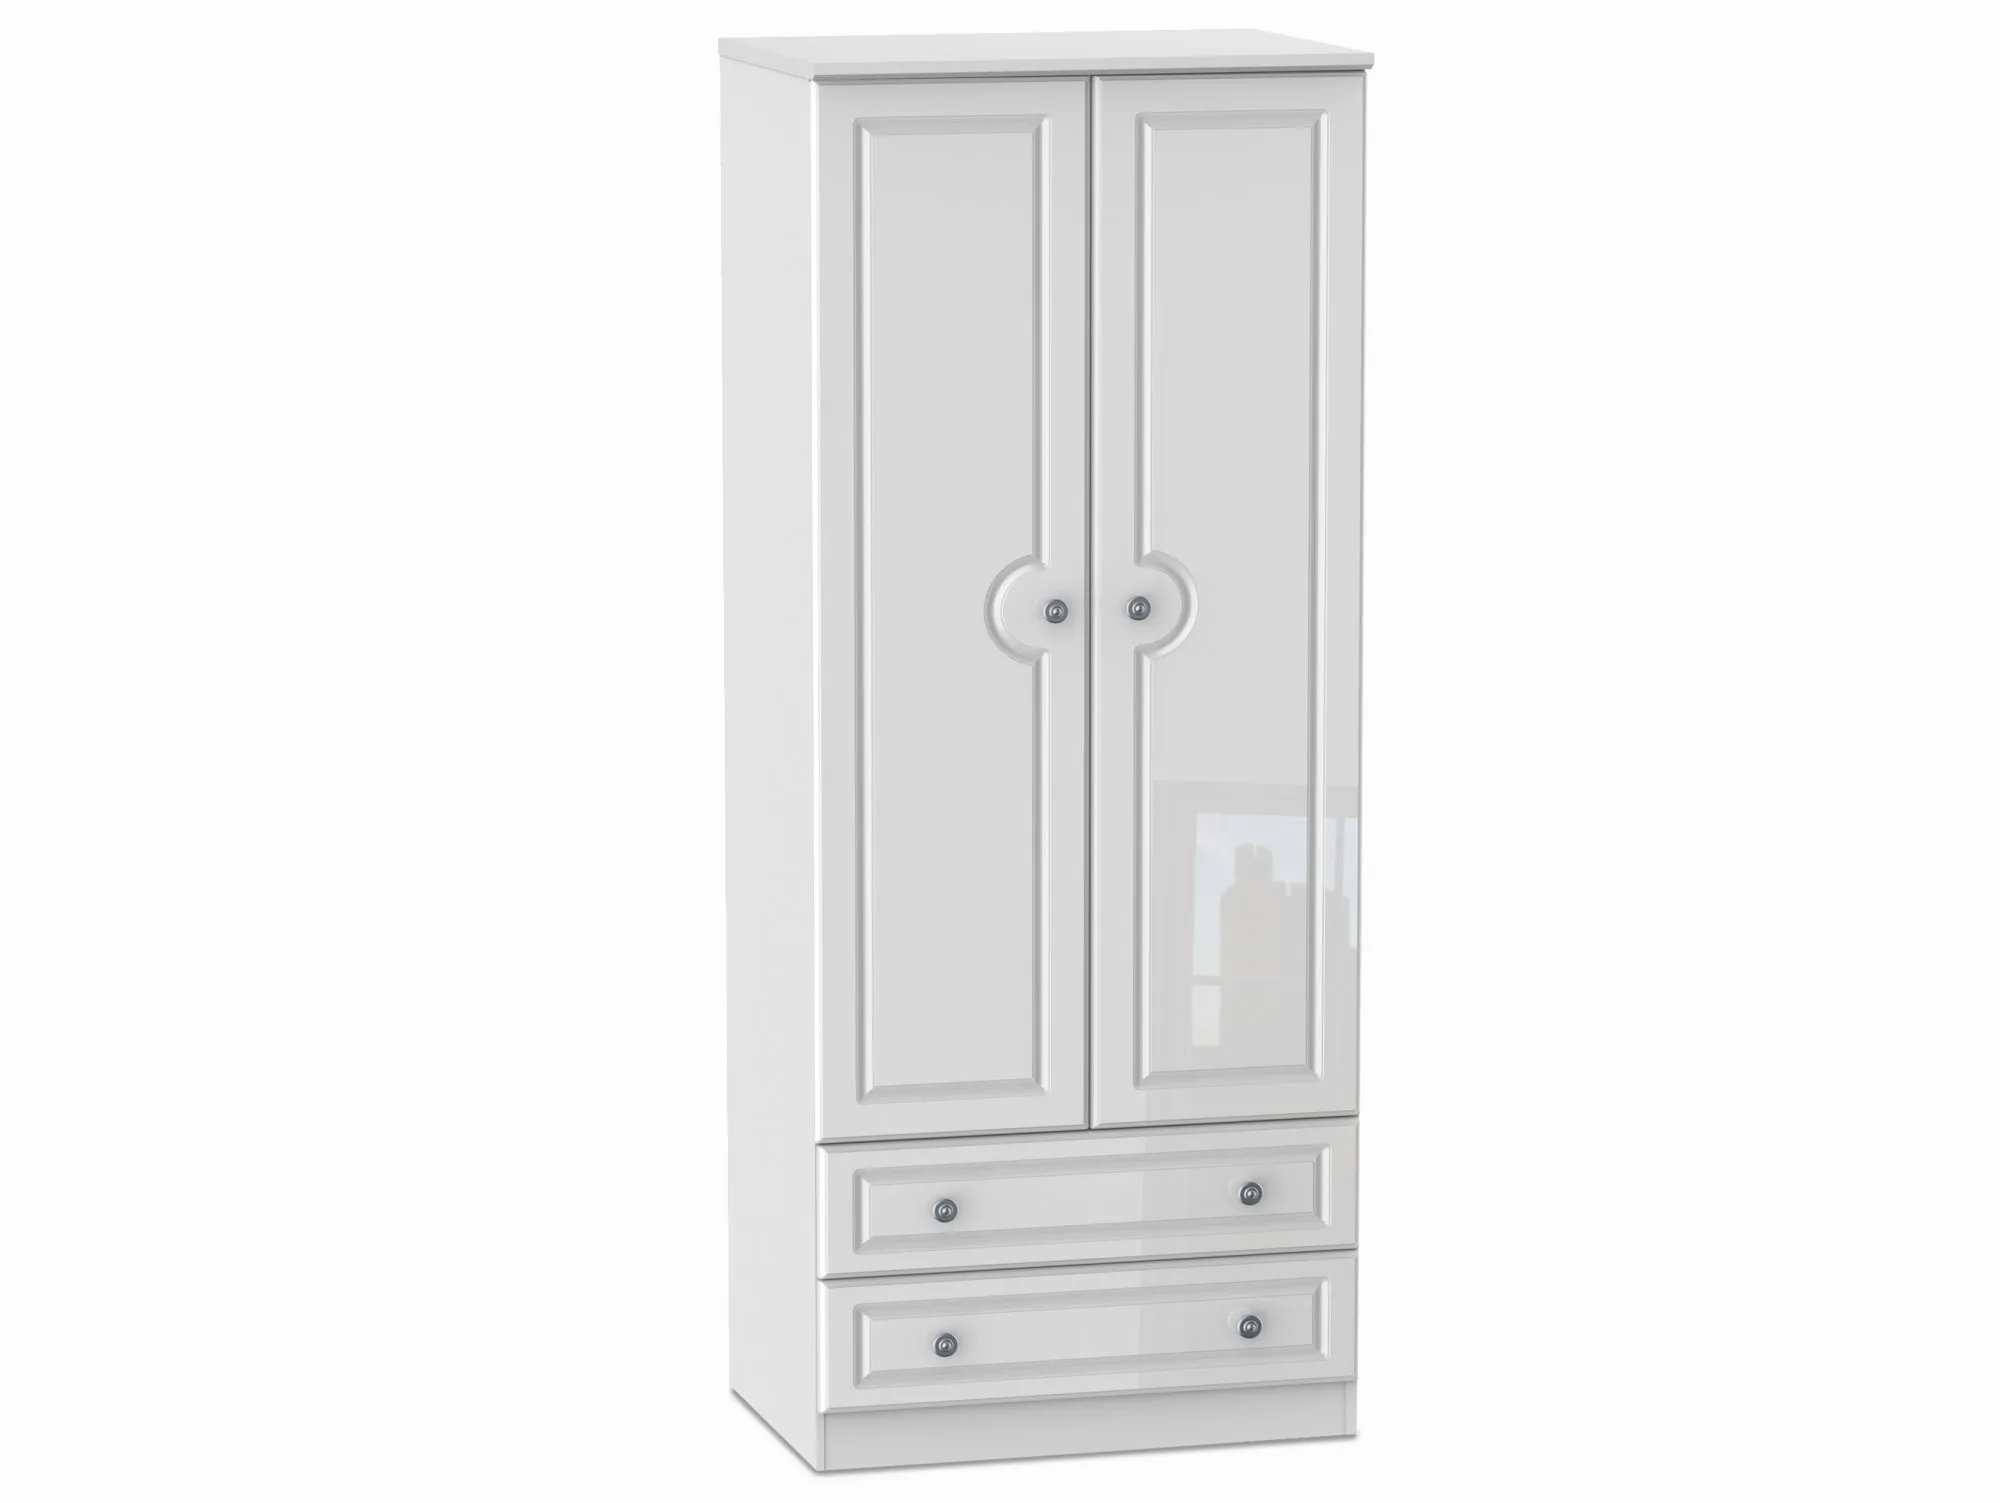 Welcome Welcome 2ft6 Pembroke White High Gloss 2 Door 2 Drawer Tall Double Wardrobe (Assembled)